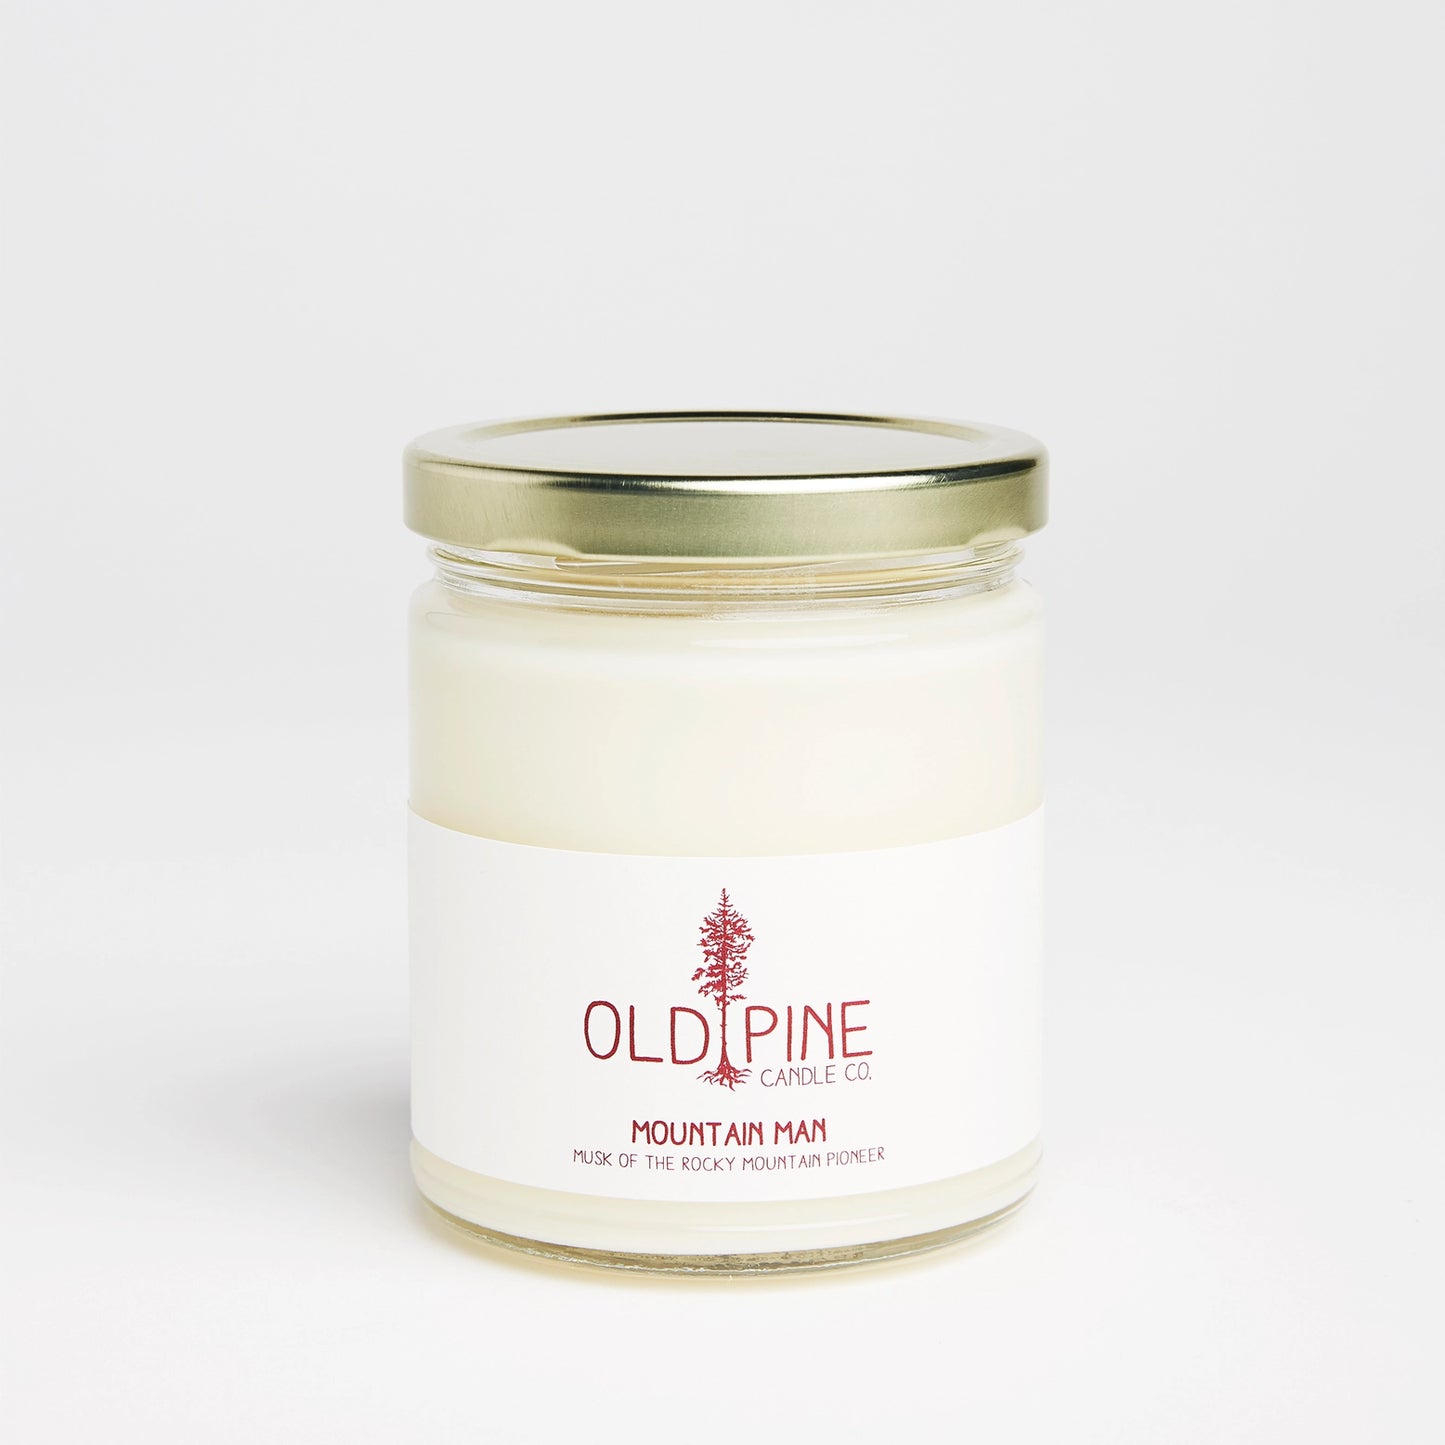 Old Pine Candle Co